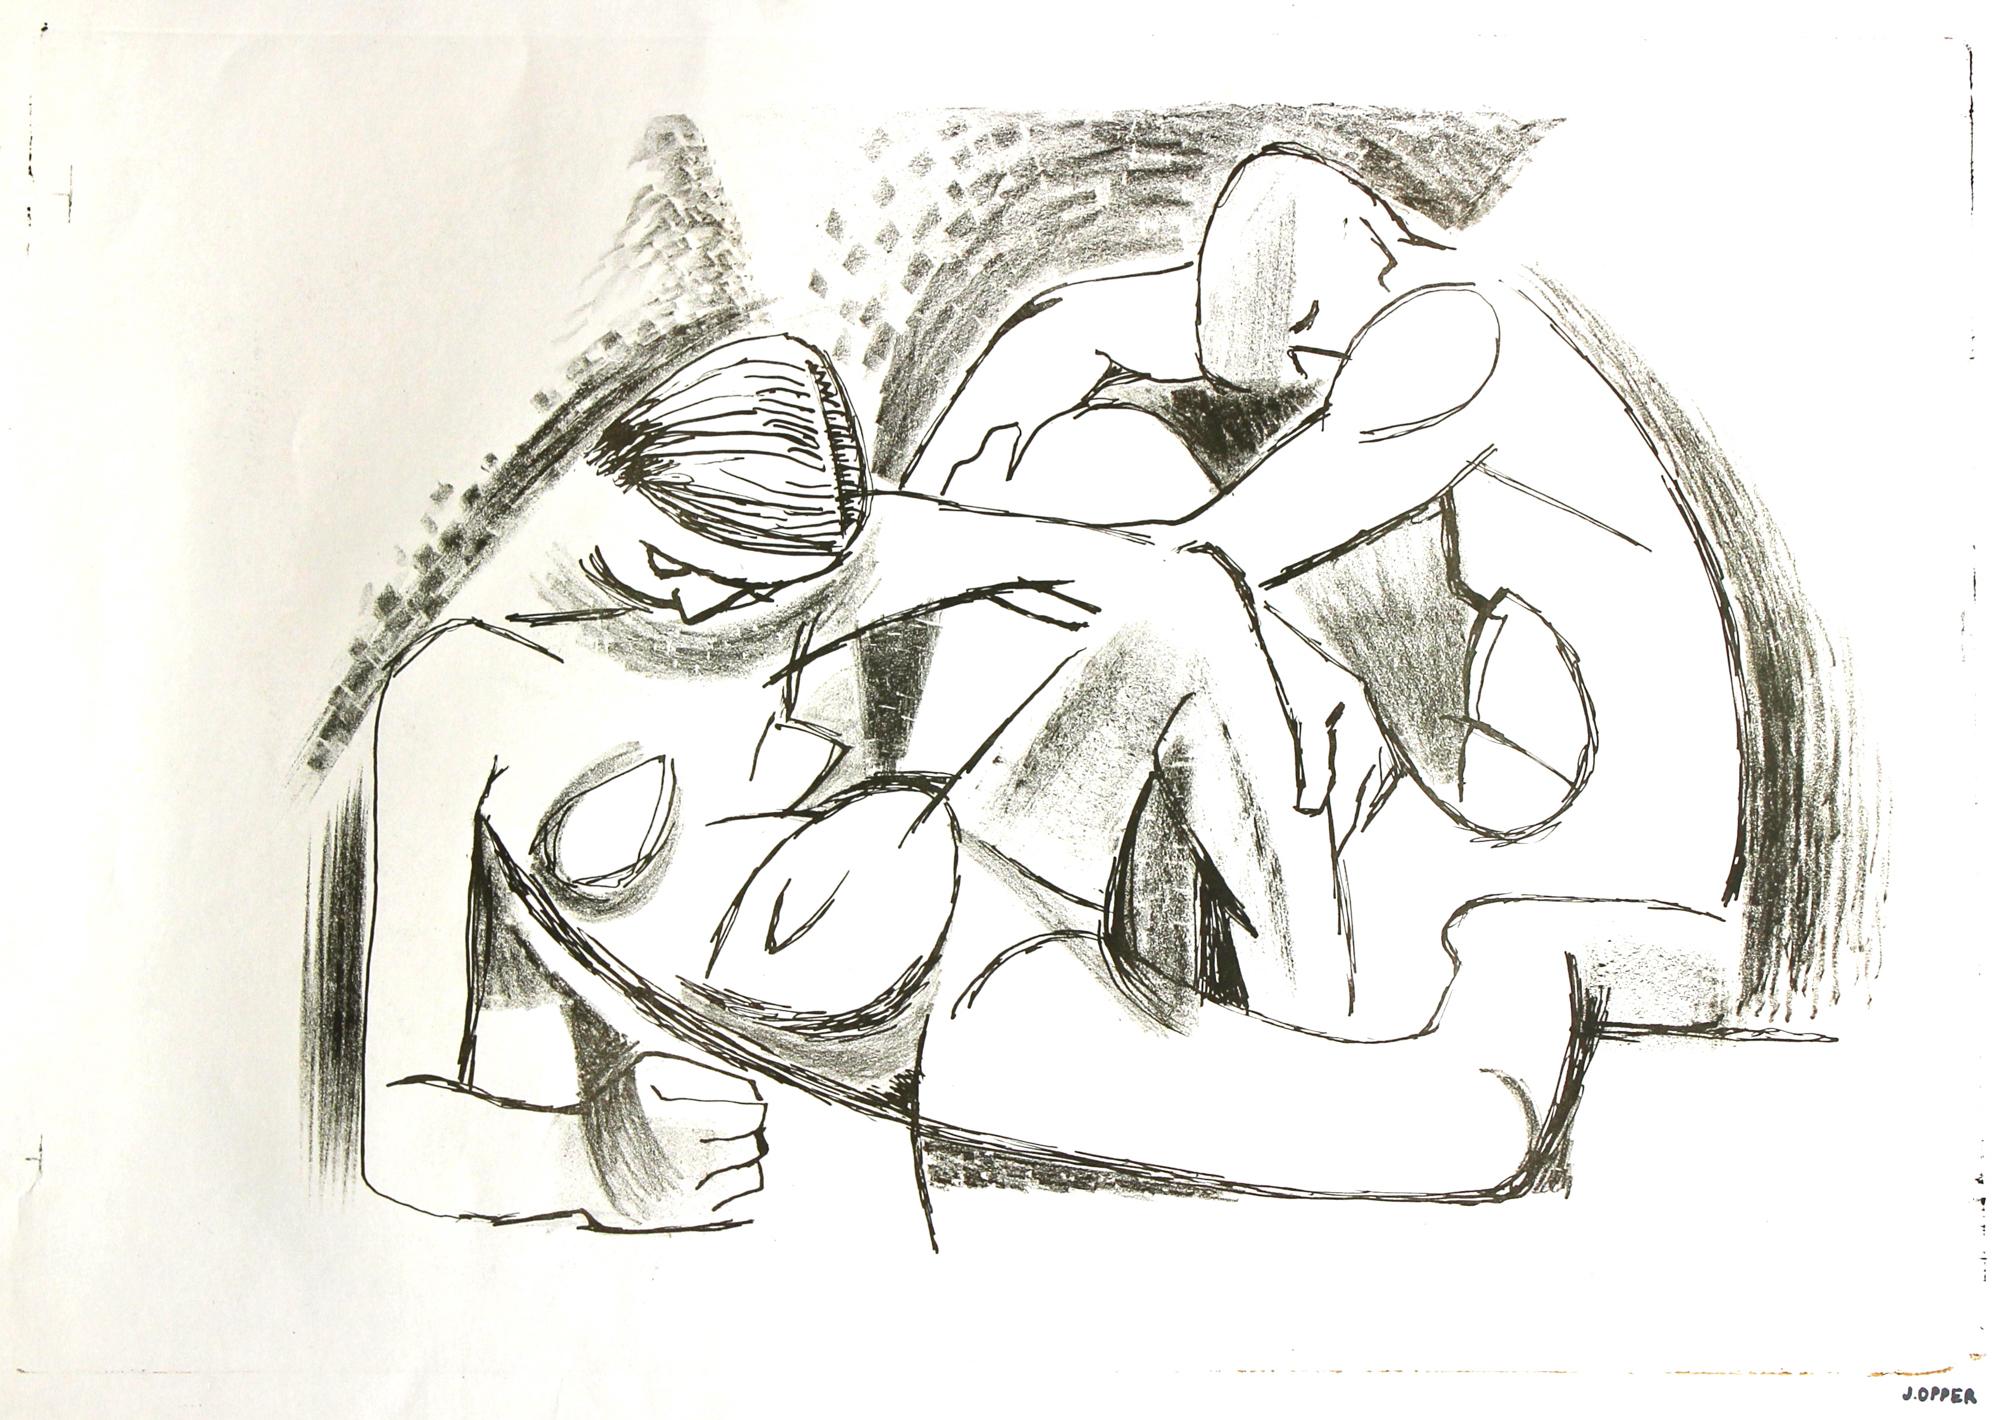 Monochromatic Nude Figures 1940's-1950's Stone Lithograph